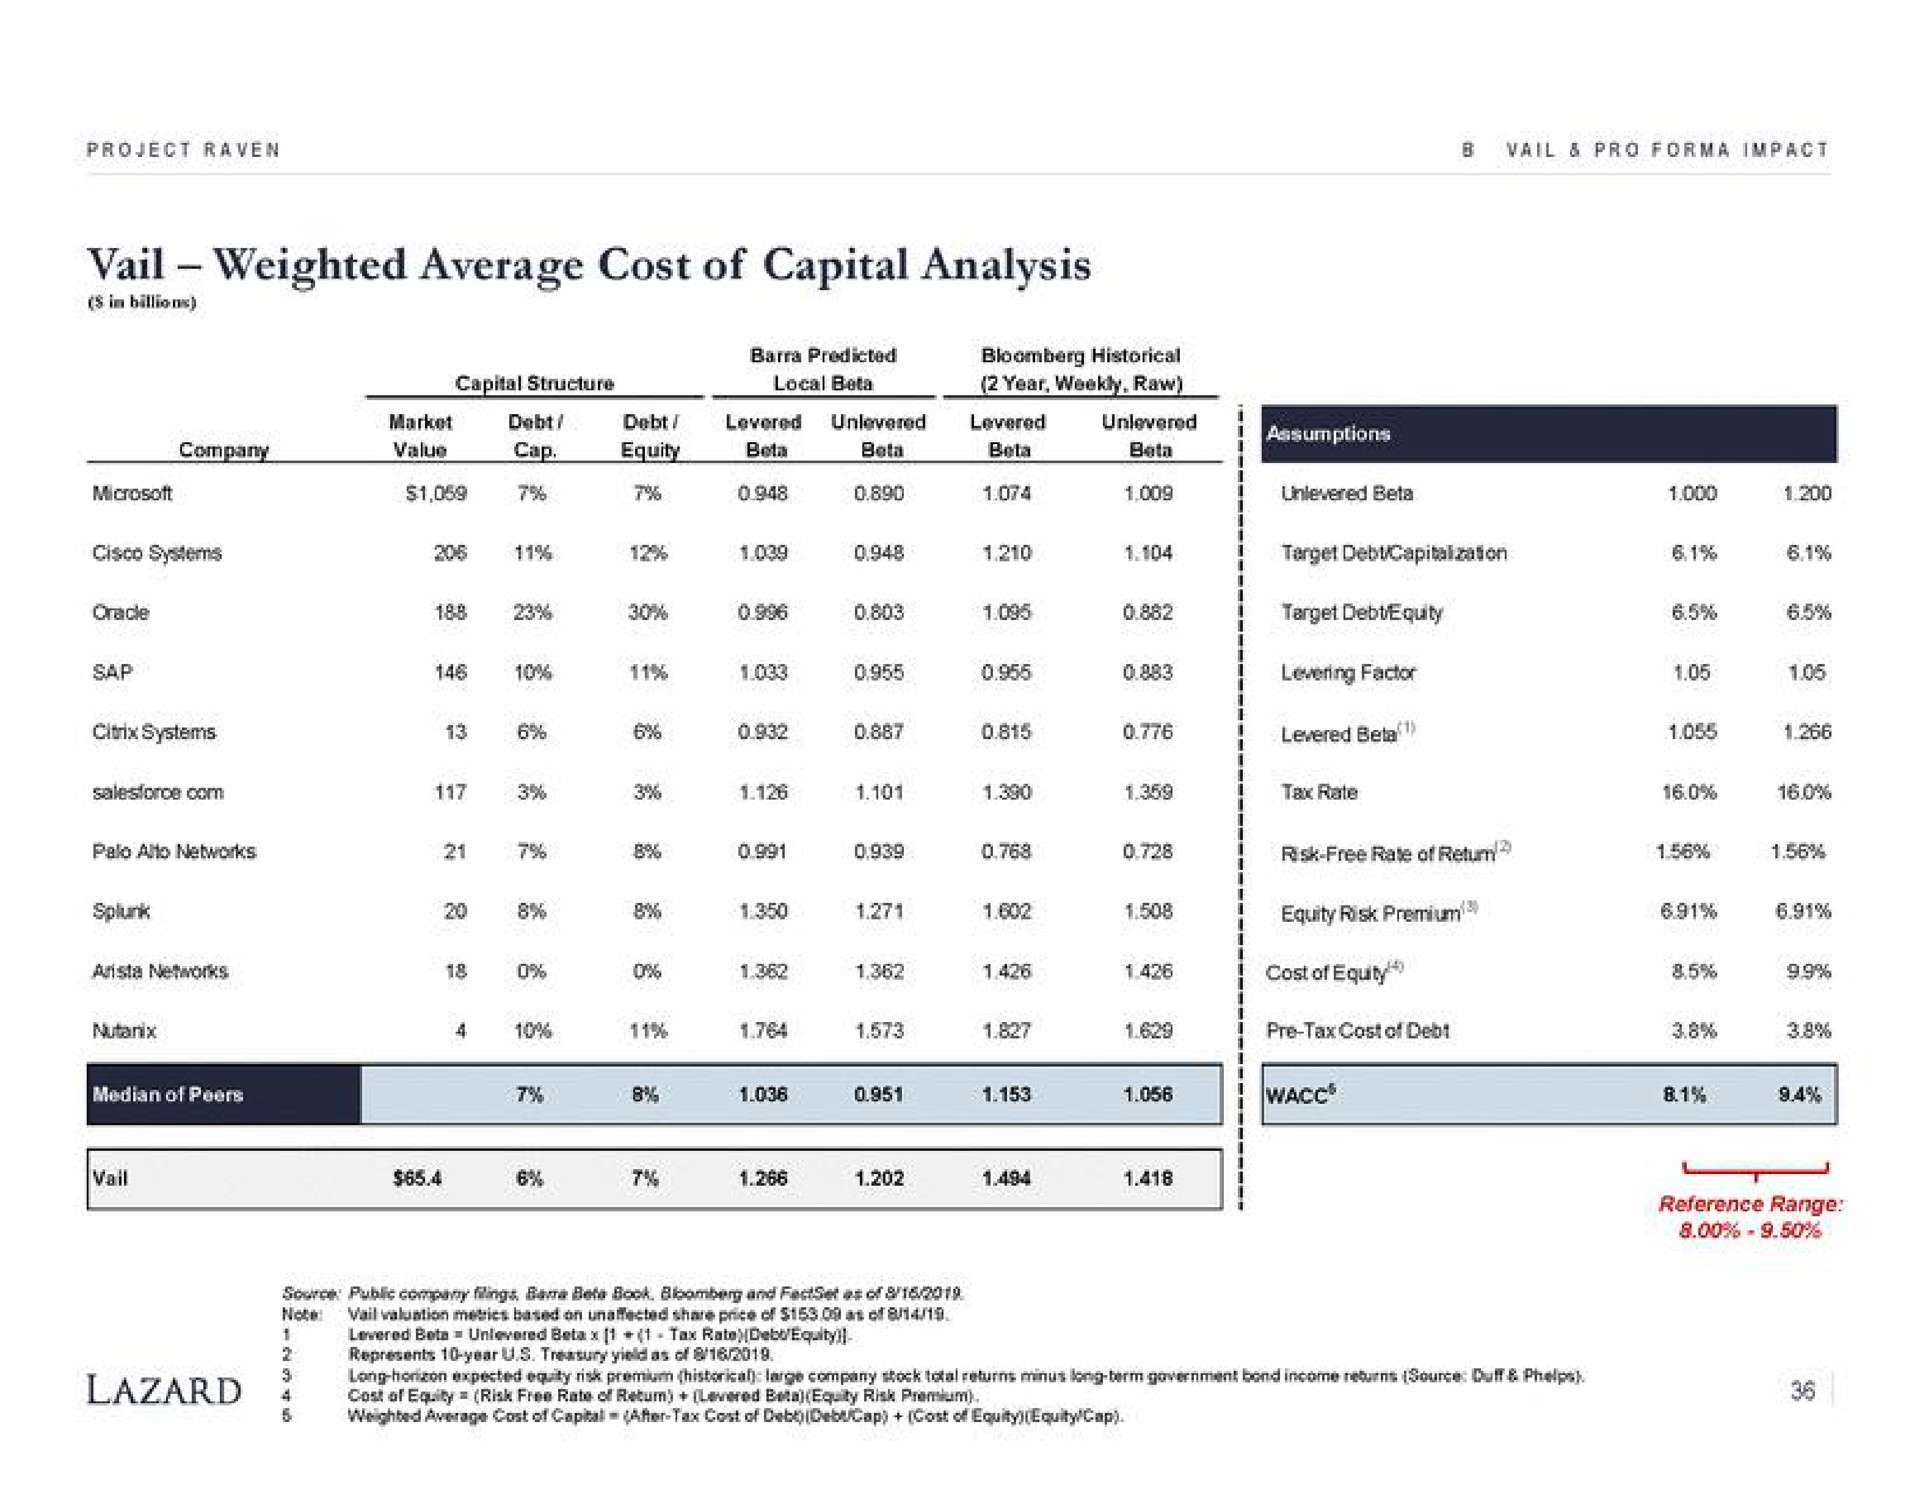 vail weighted average cost of capital analysis | Lazard